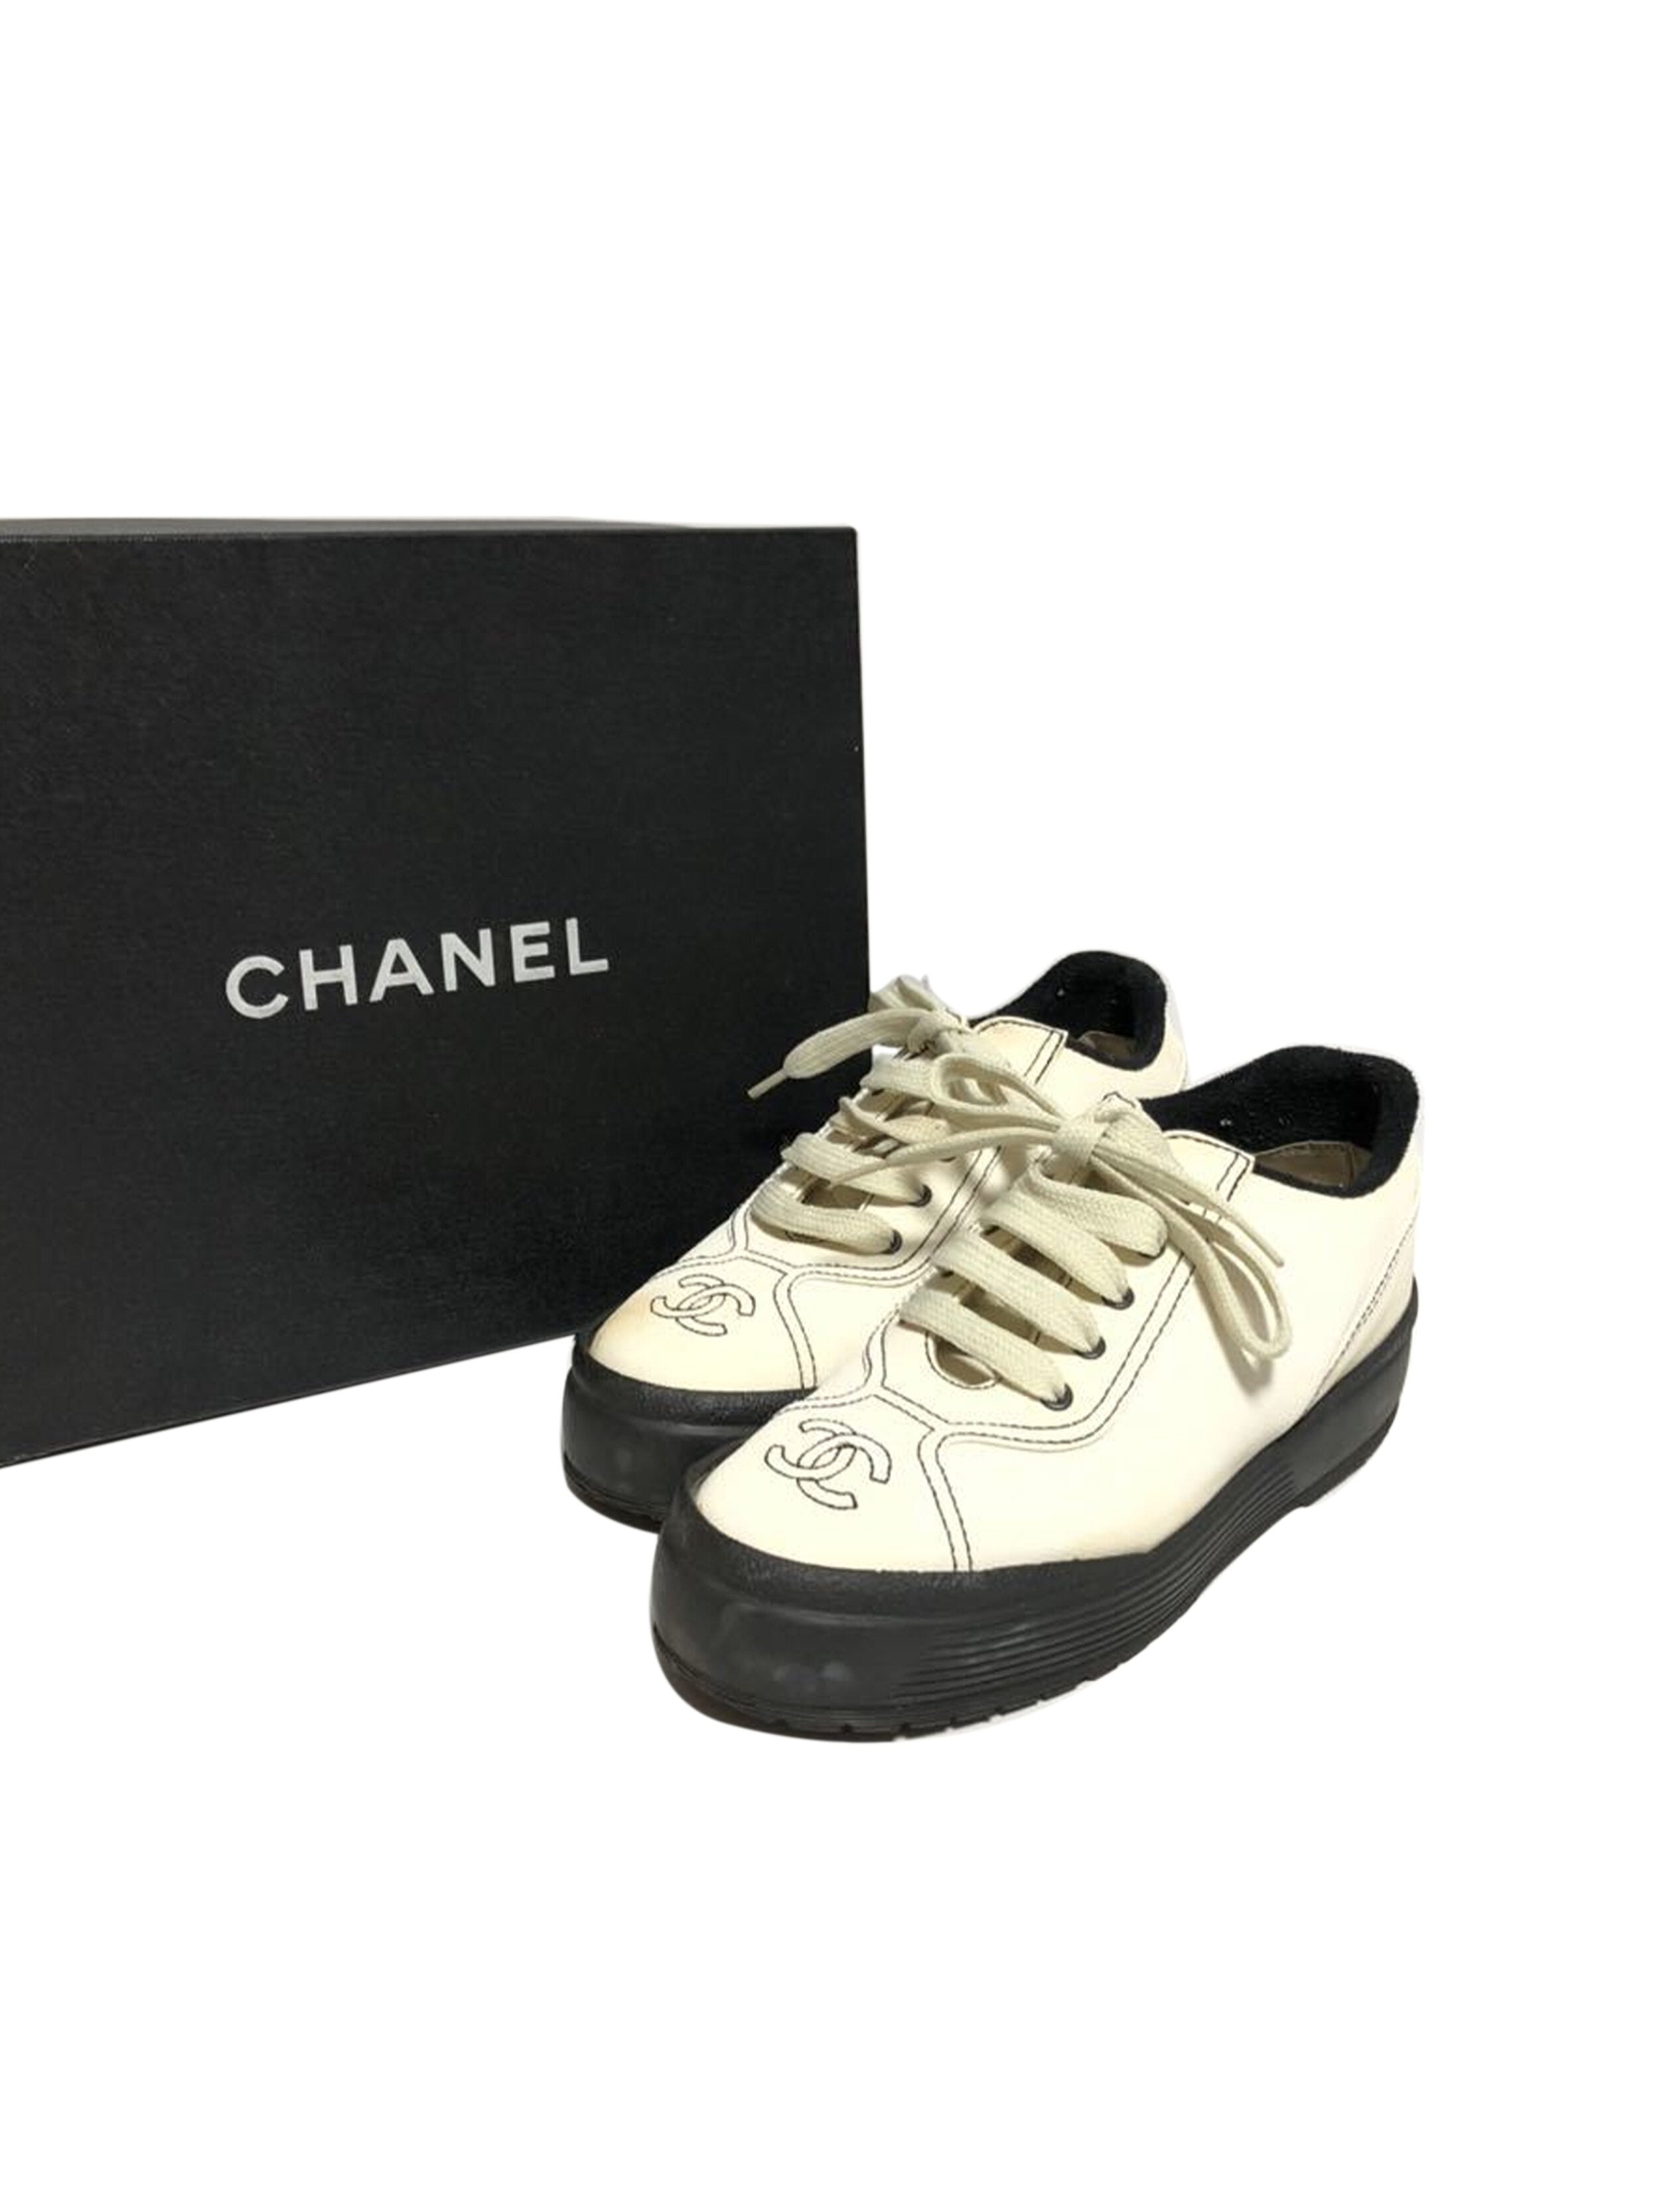 CHANEL, Shoes, Chanel White Sneakers